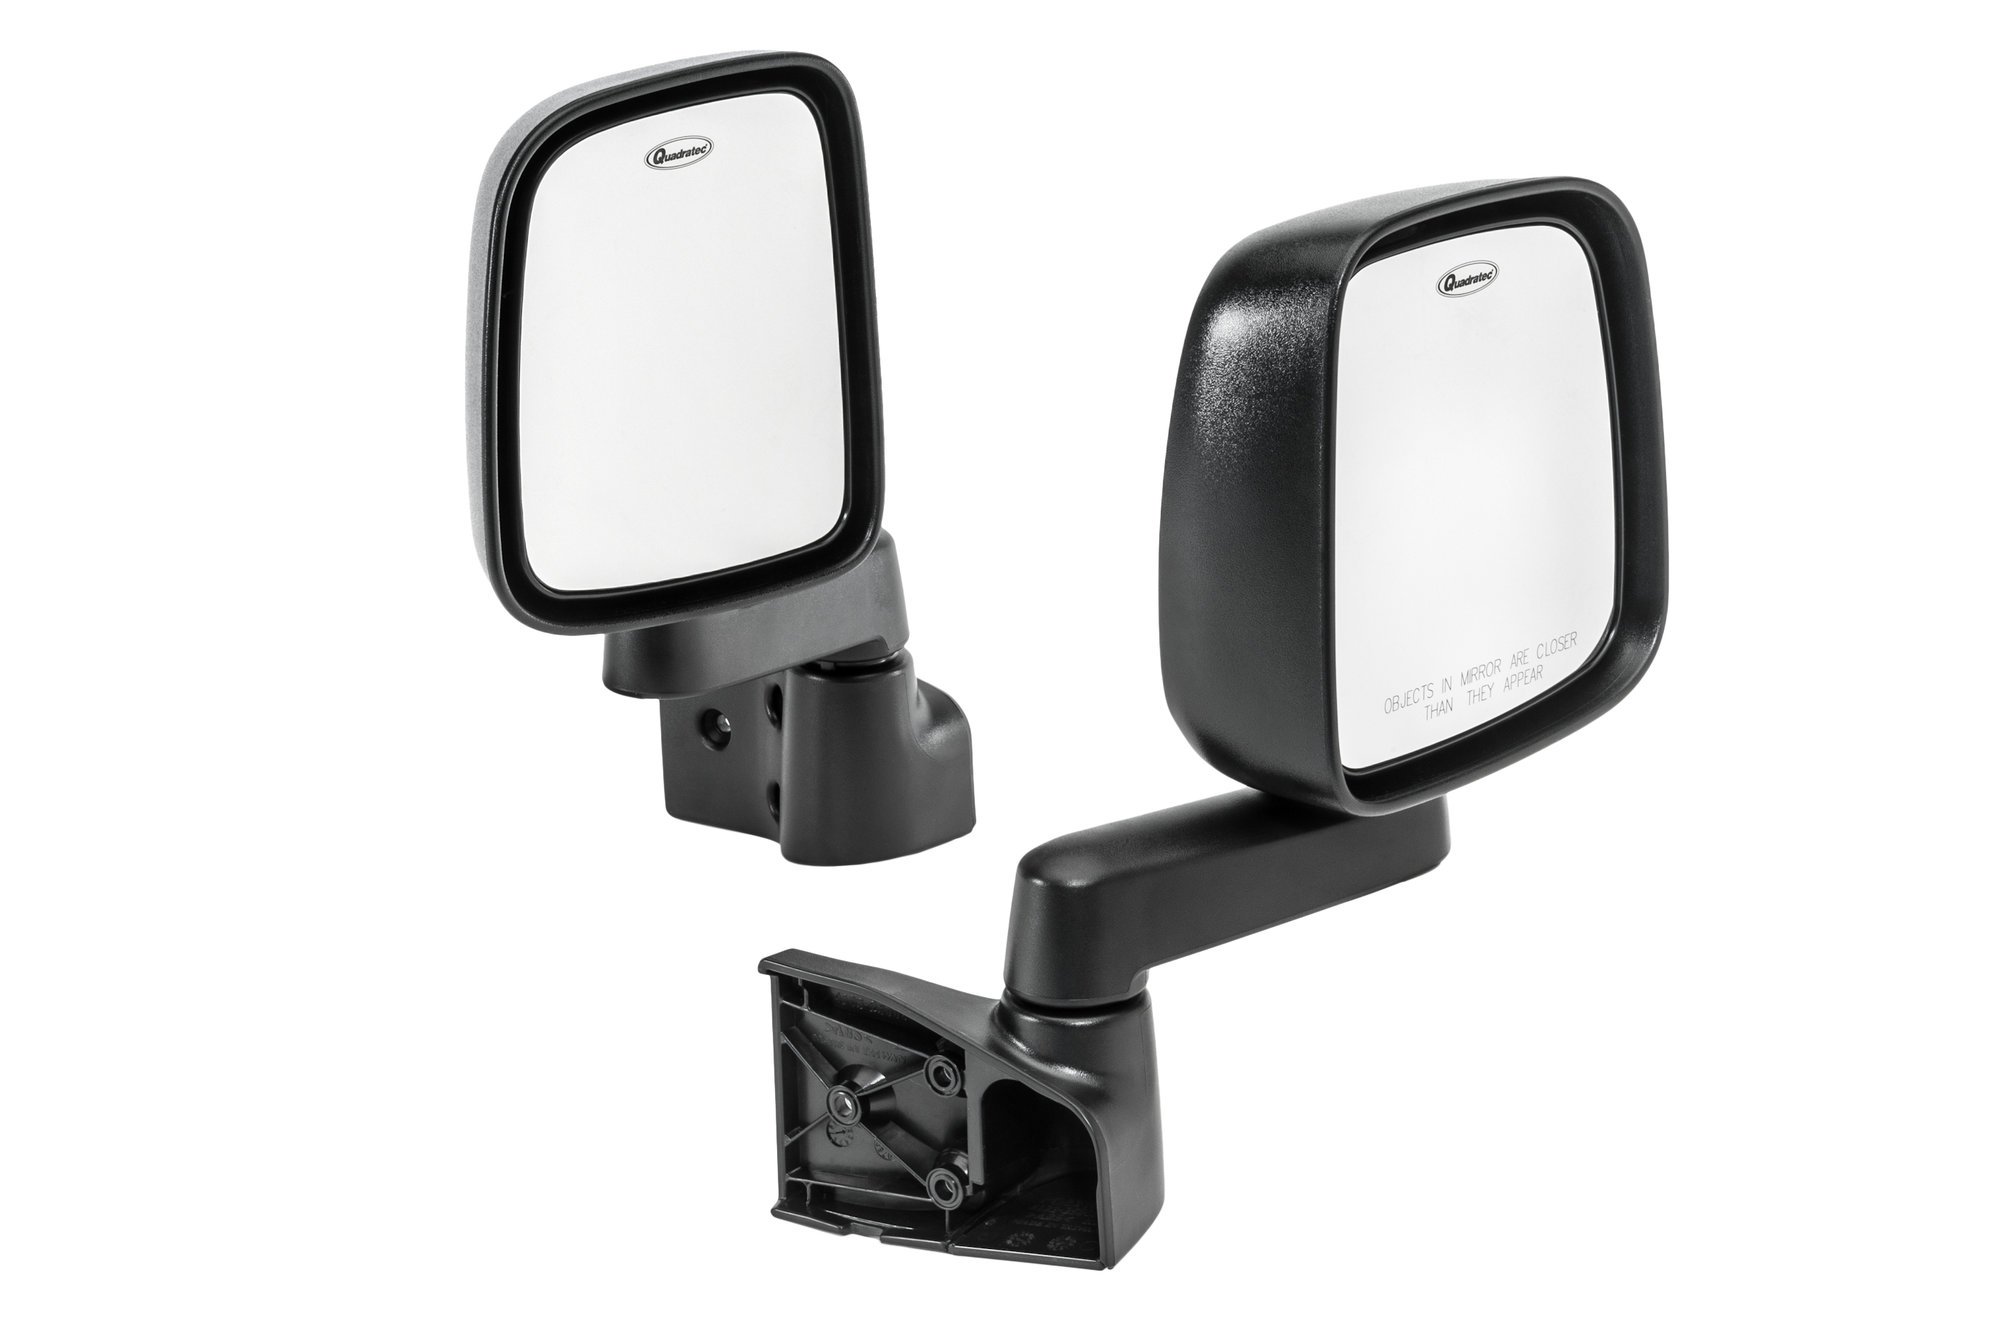 Quadratec 03-06 Factory Styling Replacement Mirror Kit in Black for 87-18 Jeep  Wrangler YJ, TJ, 18-21 JK, JL & JT with Aftermarket Tube Doors | Quadratec